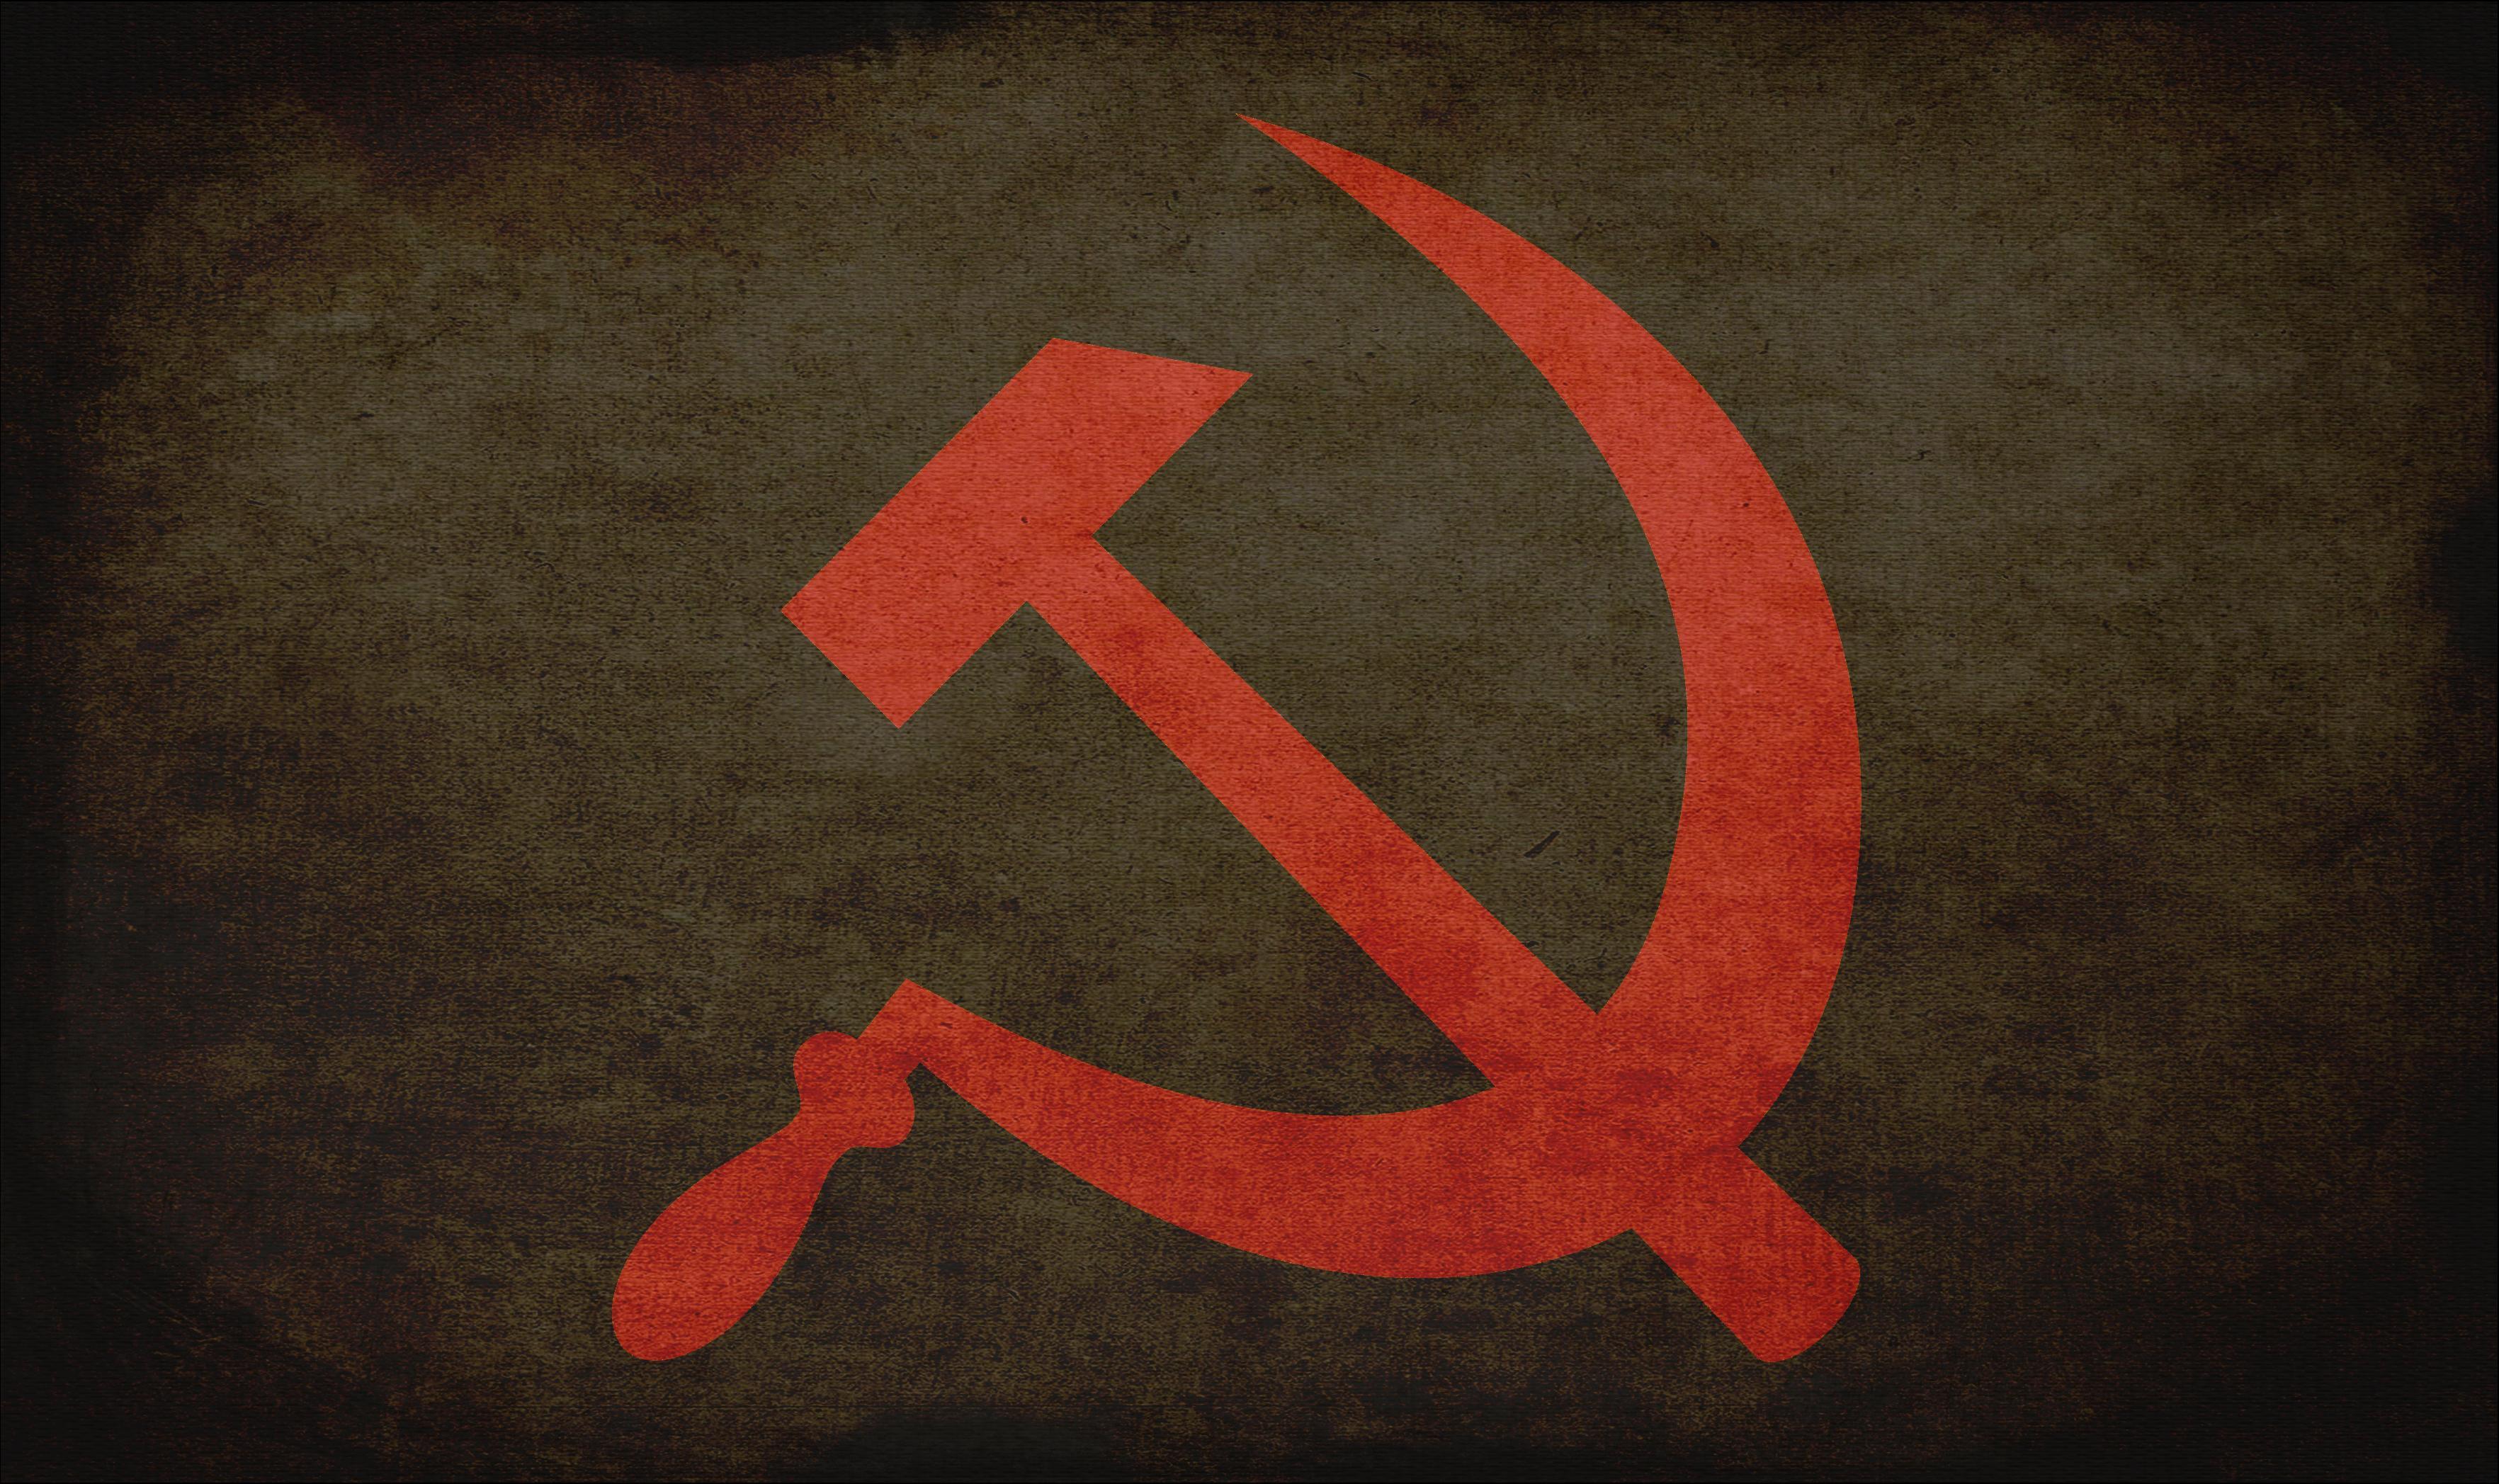 Hammer And Sickle Wallpaper (Picture)